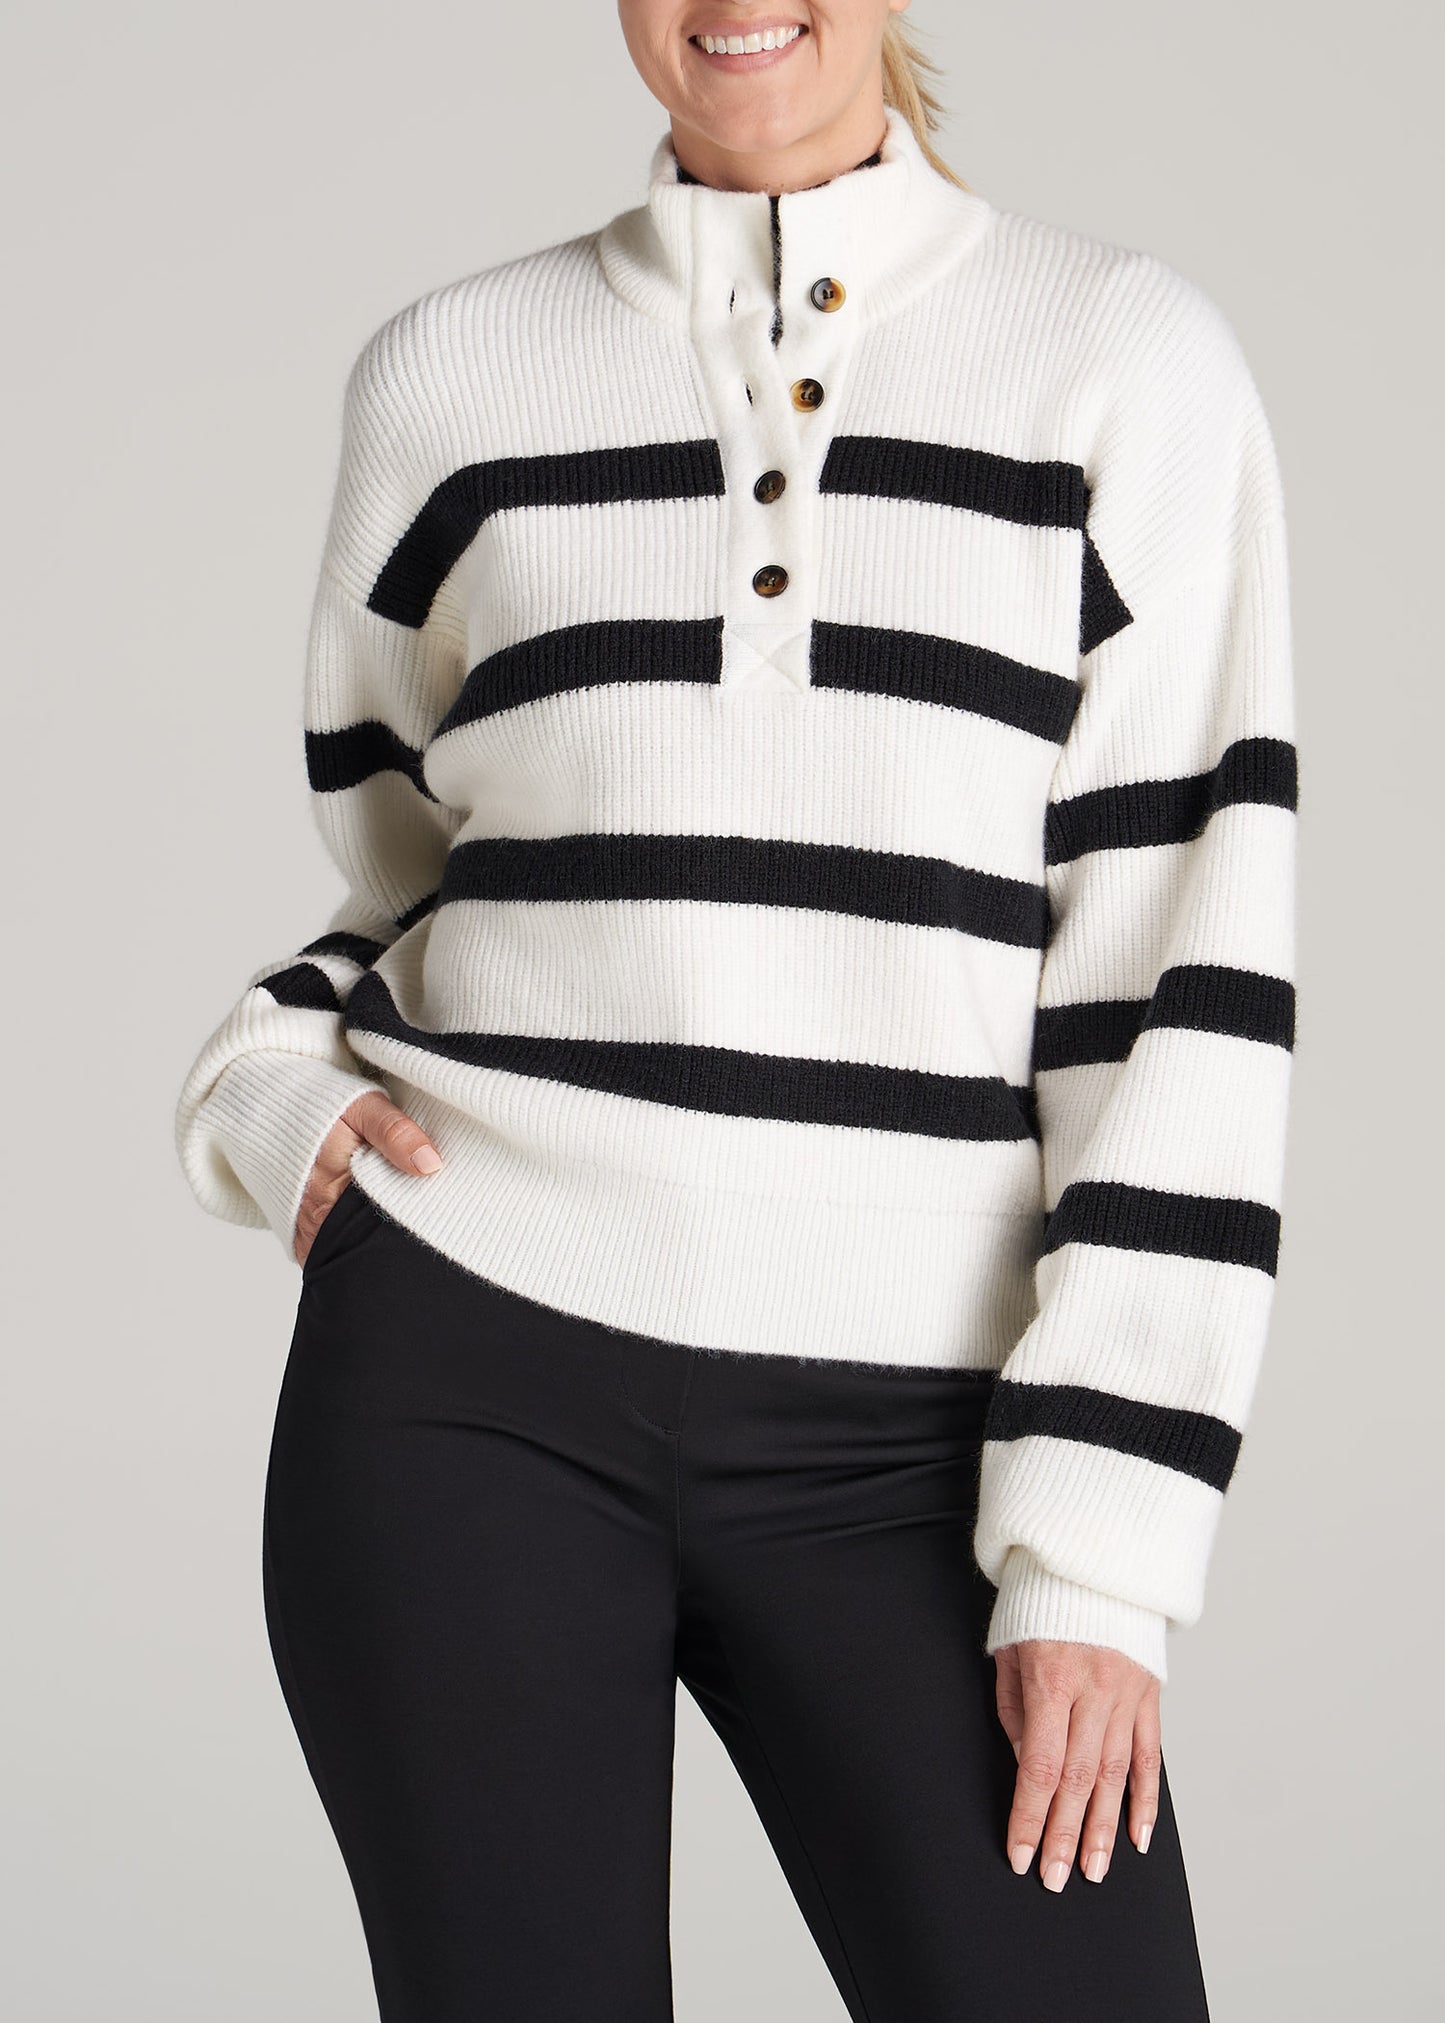       American-Tall-Women-Button-Front-Mock-Neck-Sweater-Off-White-Black-Stripe-front